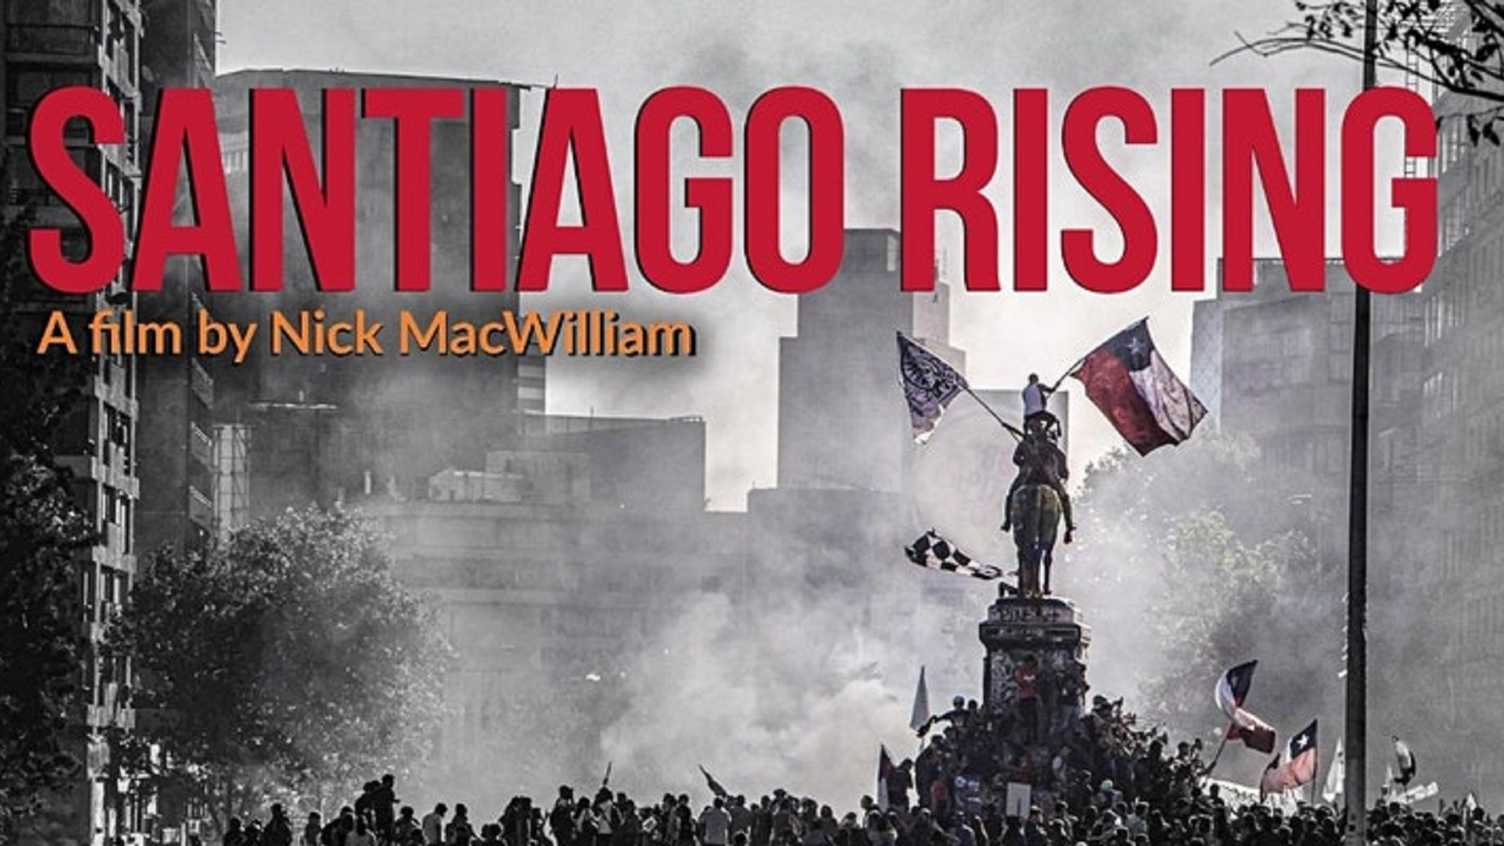 Thumbnail for Santiago Rising: A film by Nick MacWilliam | Languages and Cultures